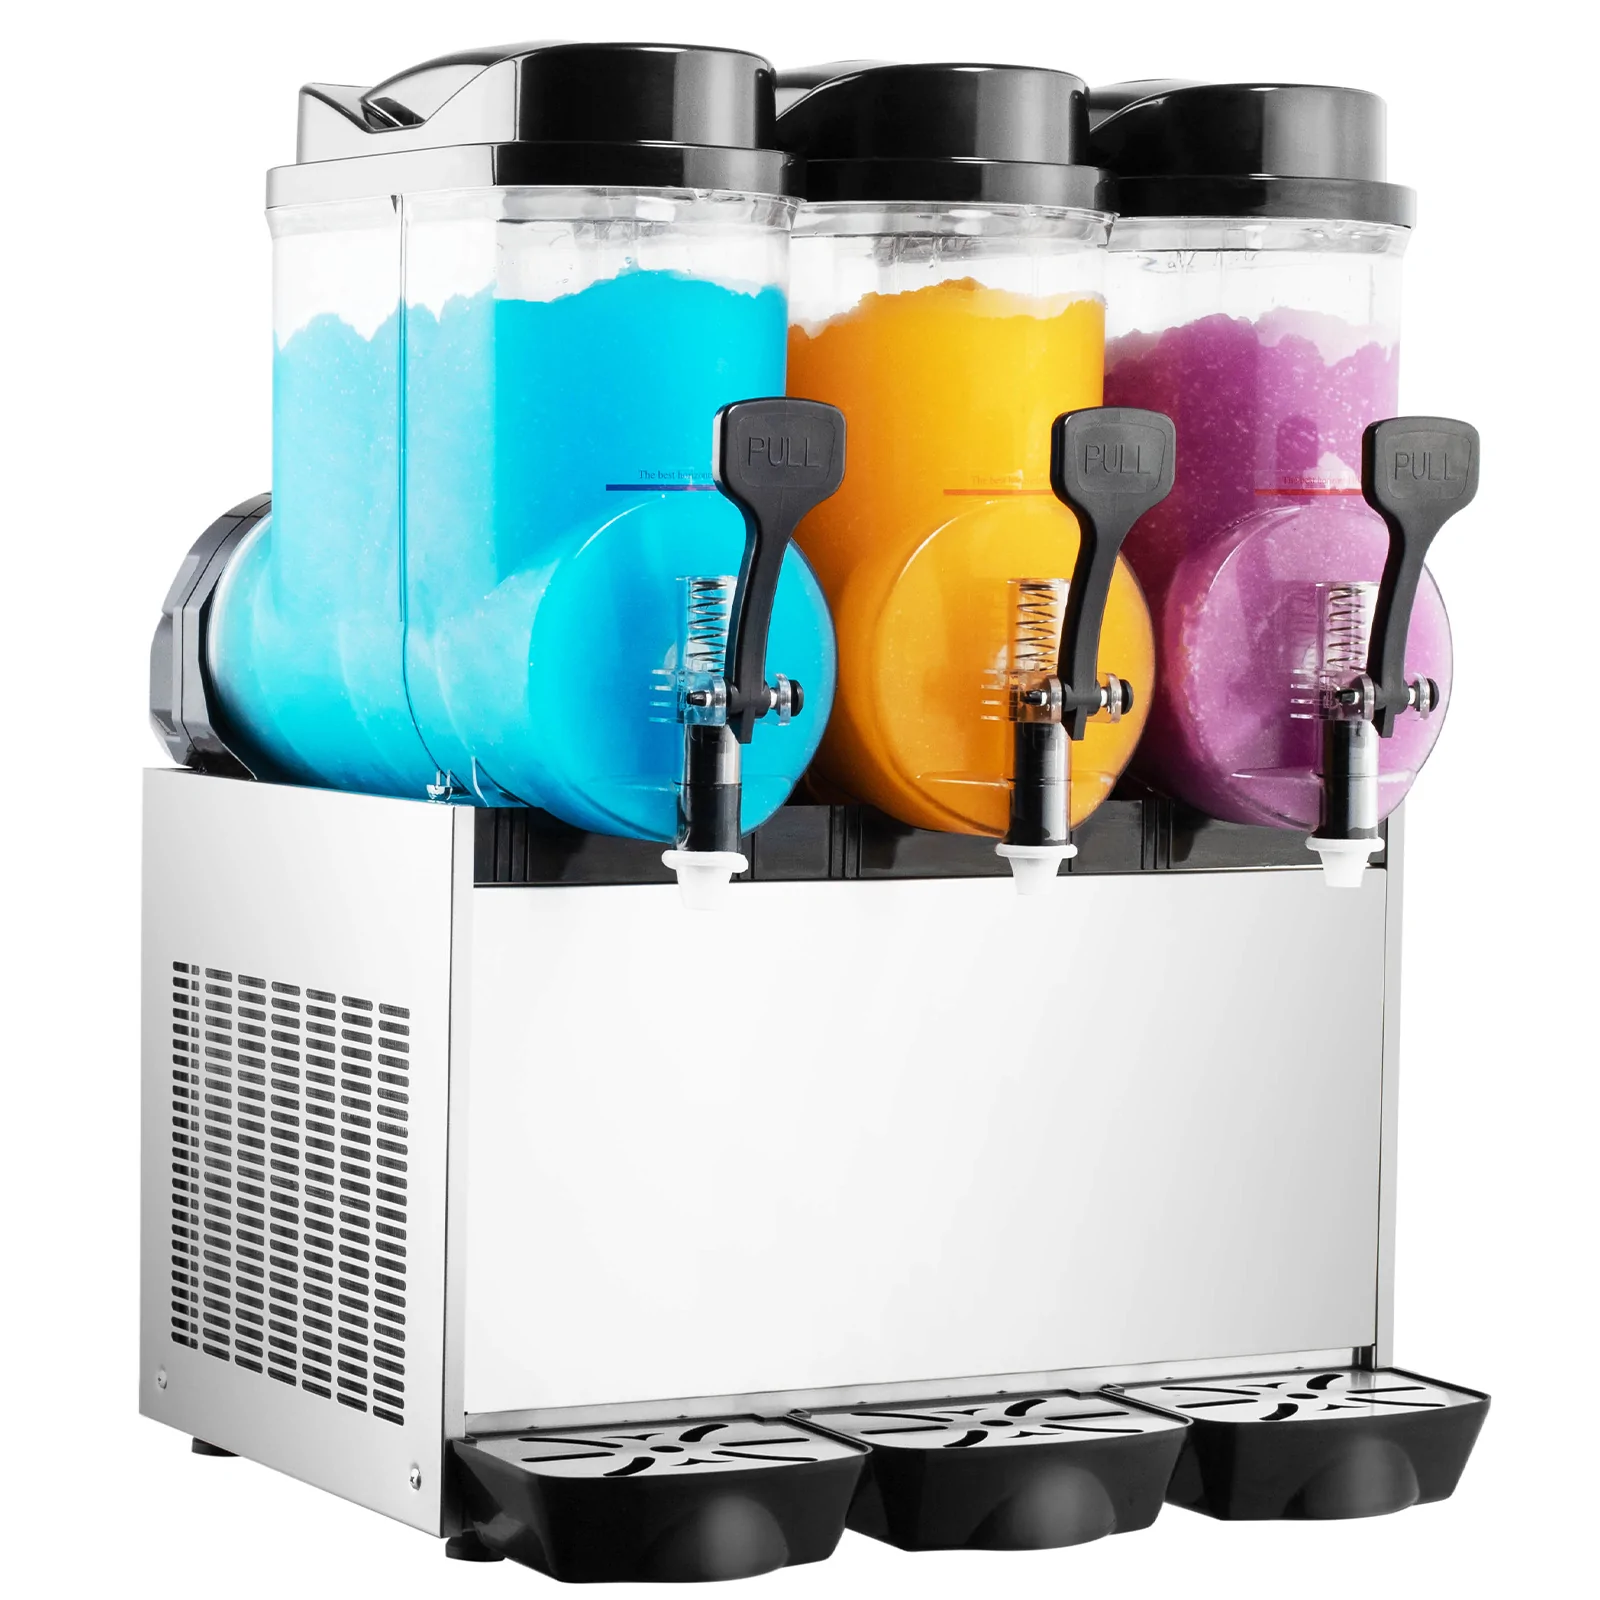 Top Six things to consider before purchasing a slush machine